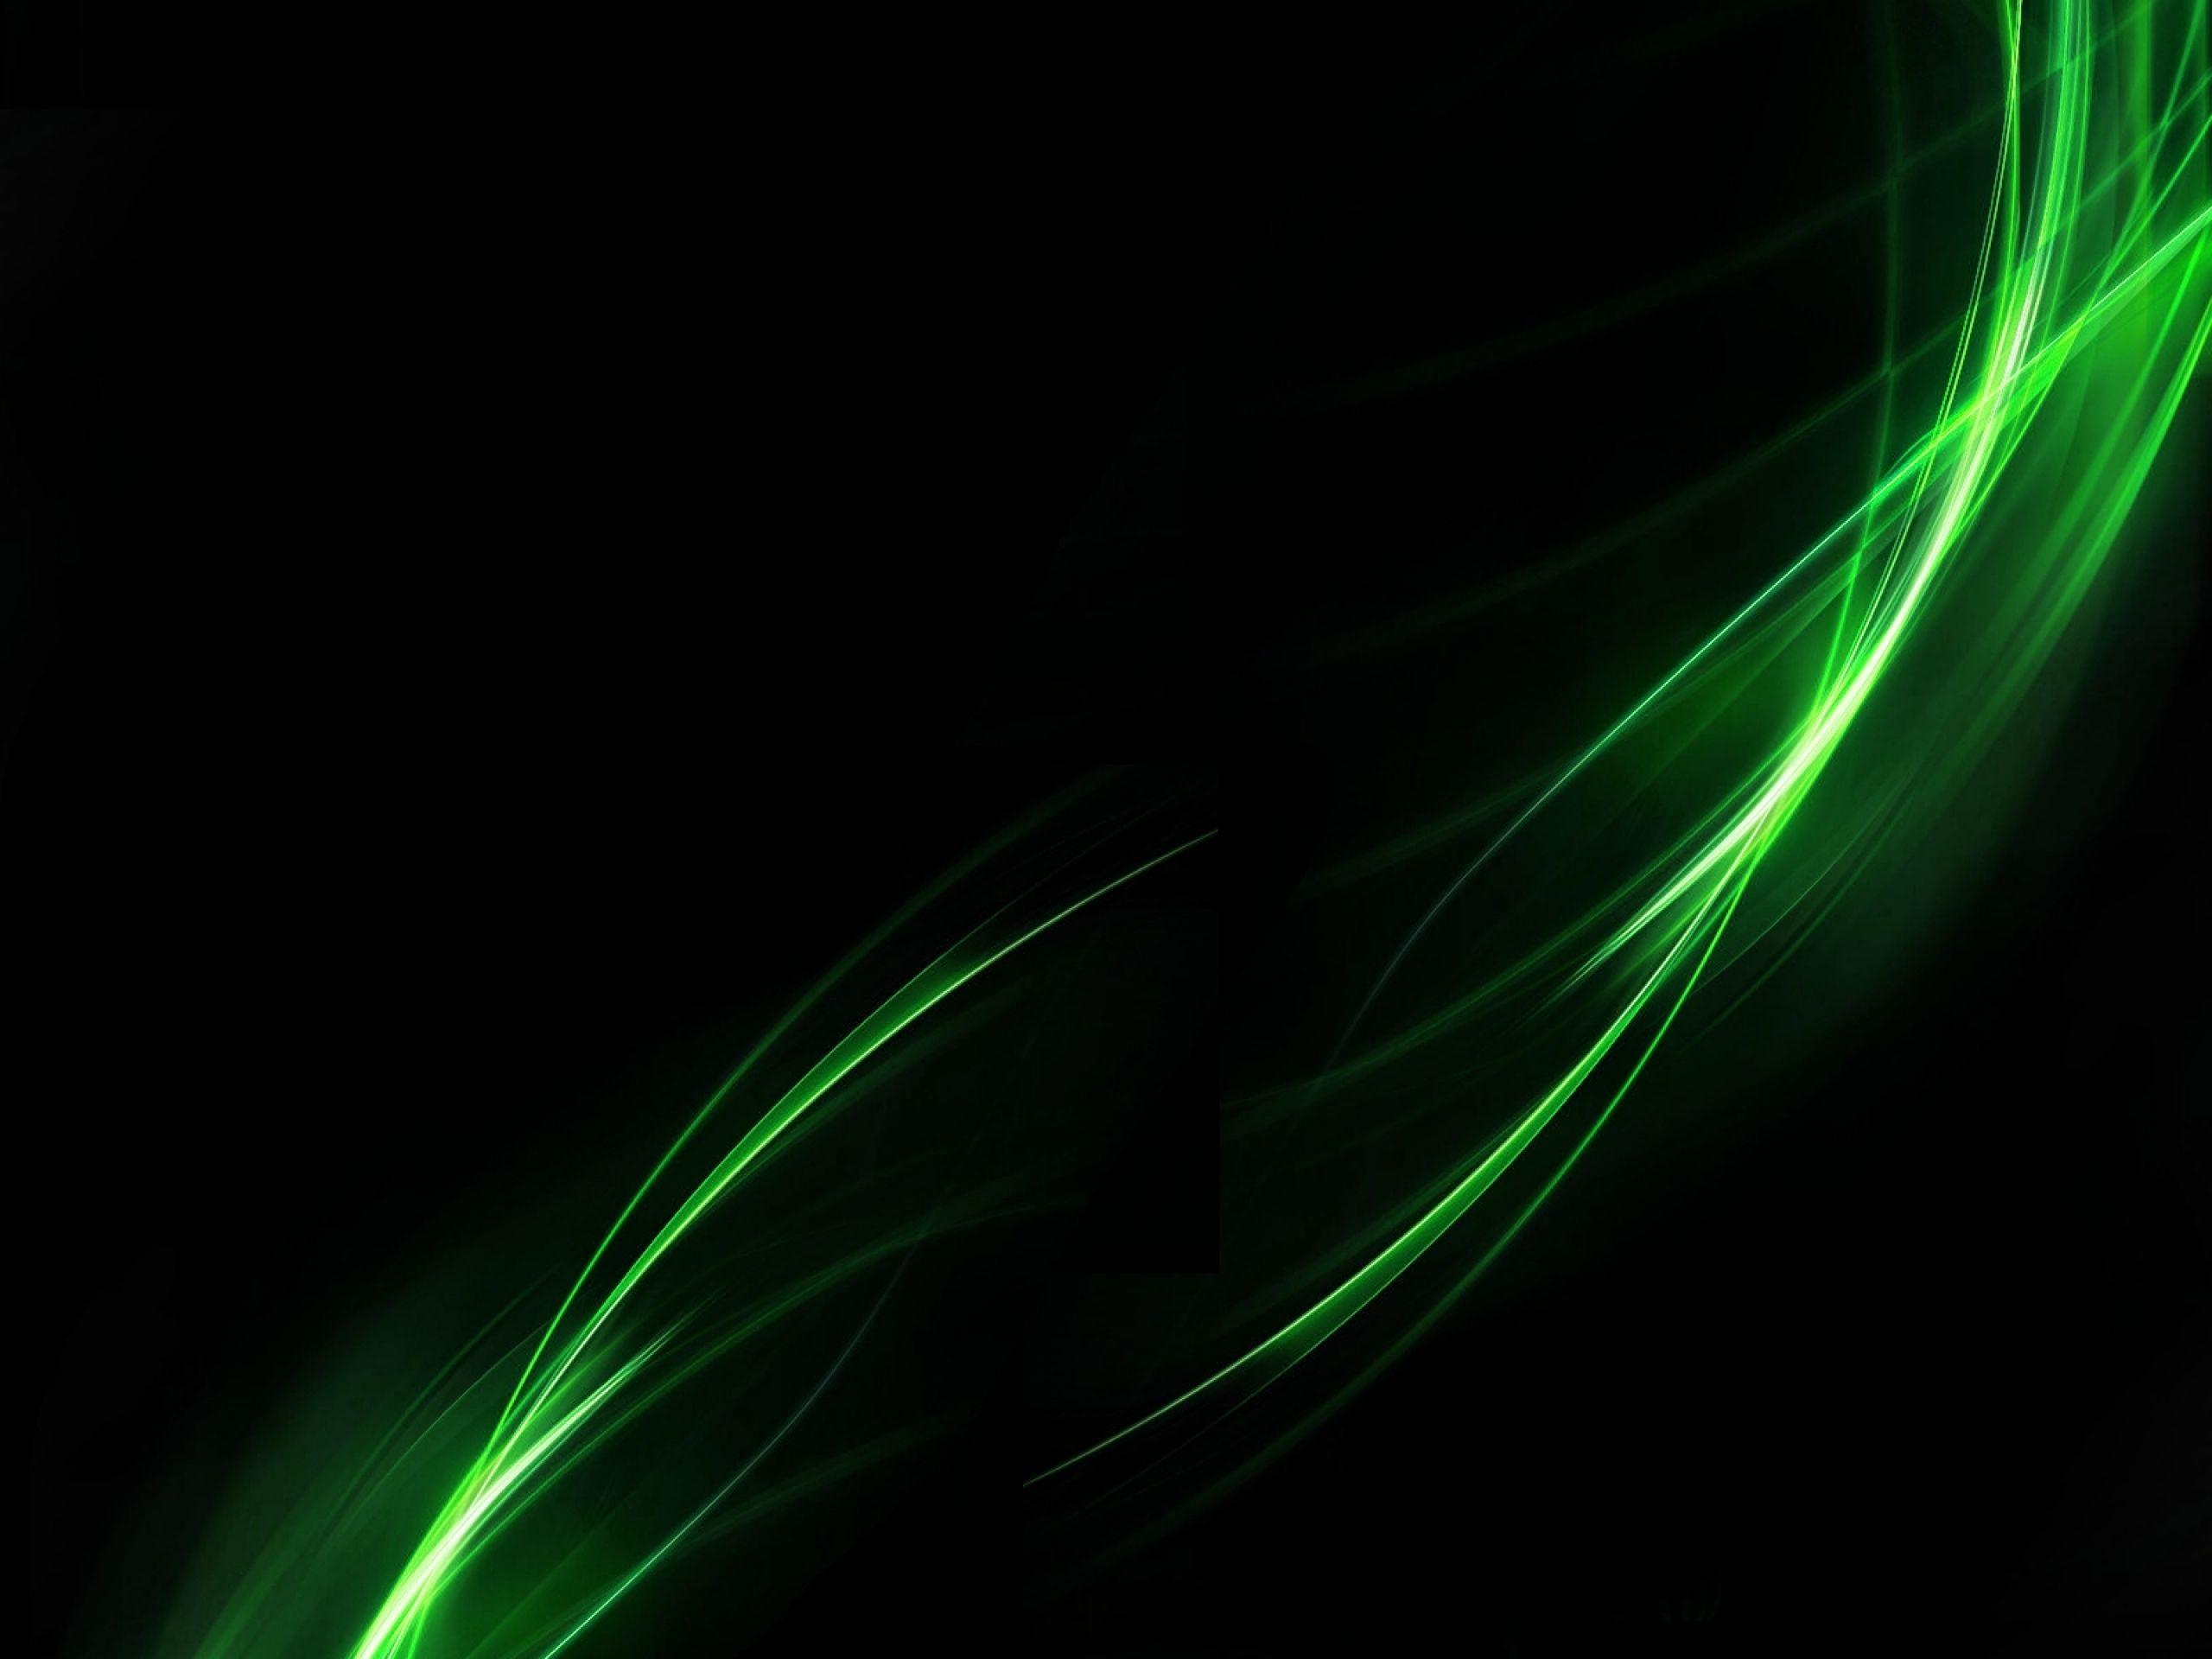 Abstract Green Lines wallpaper. Abstract Green Lines